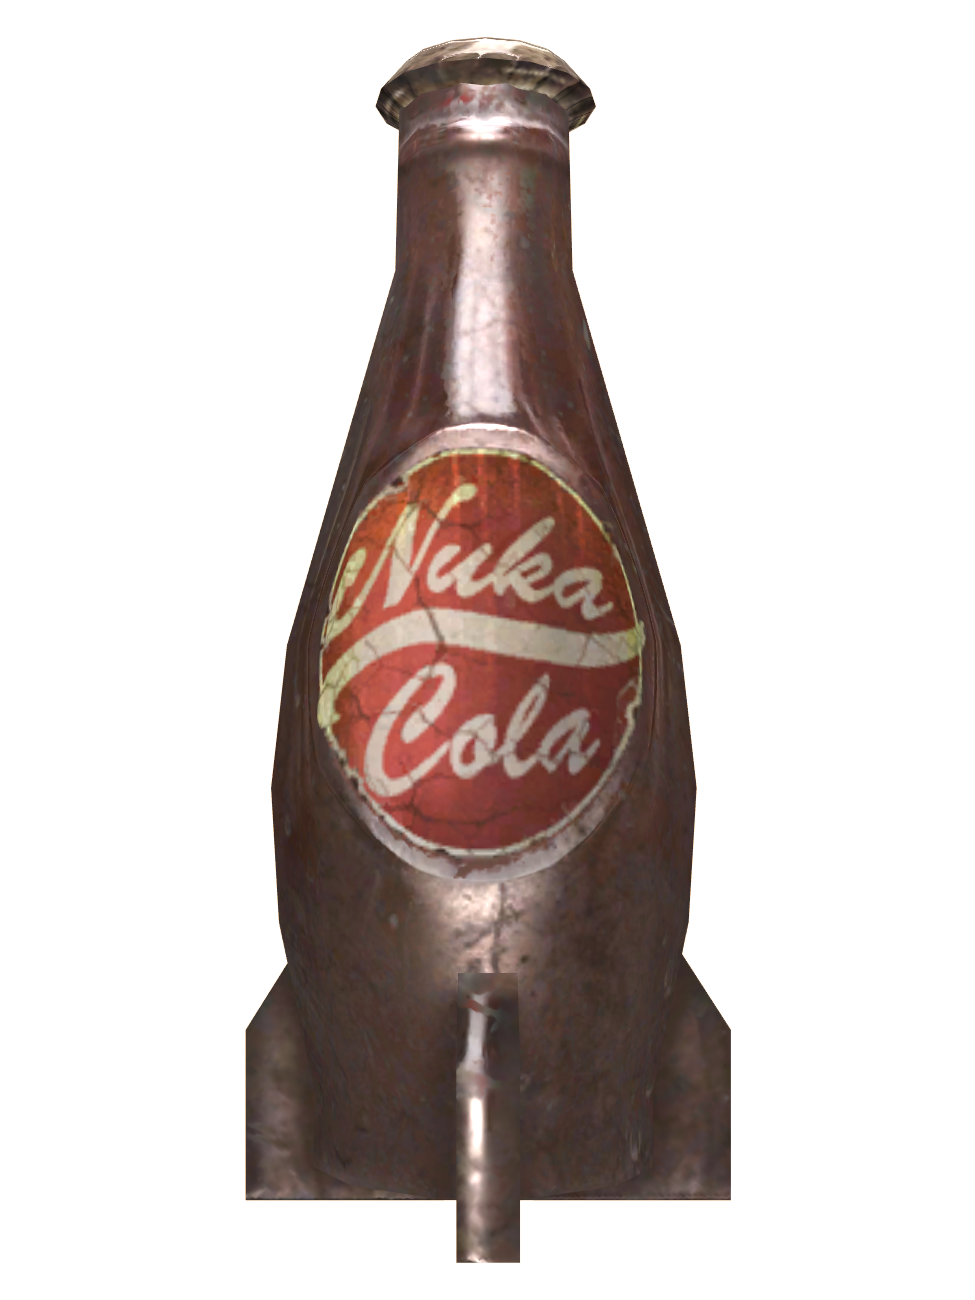 https://static.wikia.nocookie.net/fallout/images/1/10/Fallout4_Nuka_Cola.png/revision/latest?cb=20211127133853